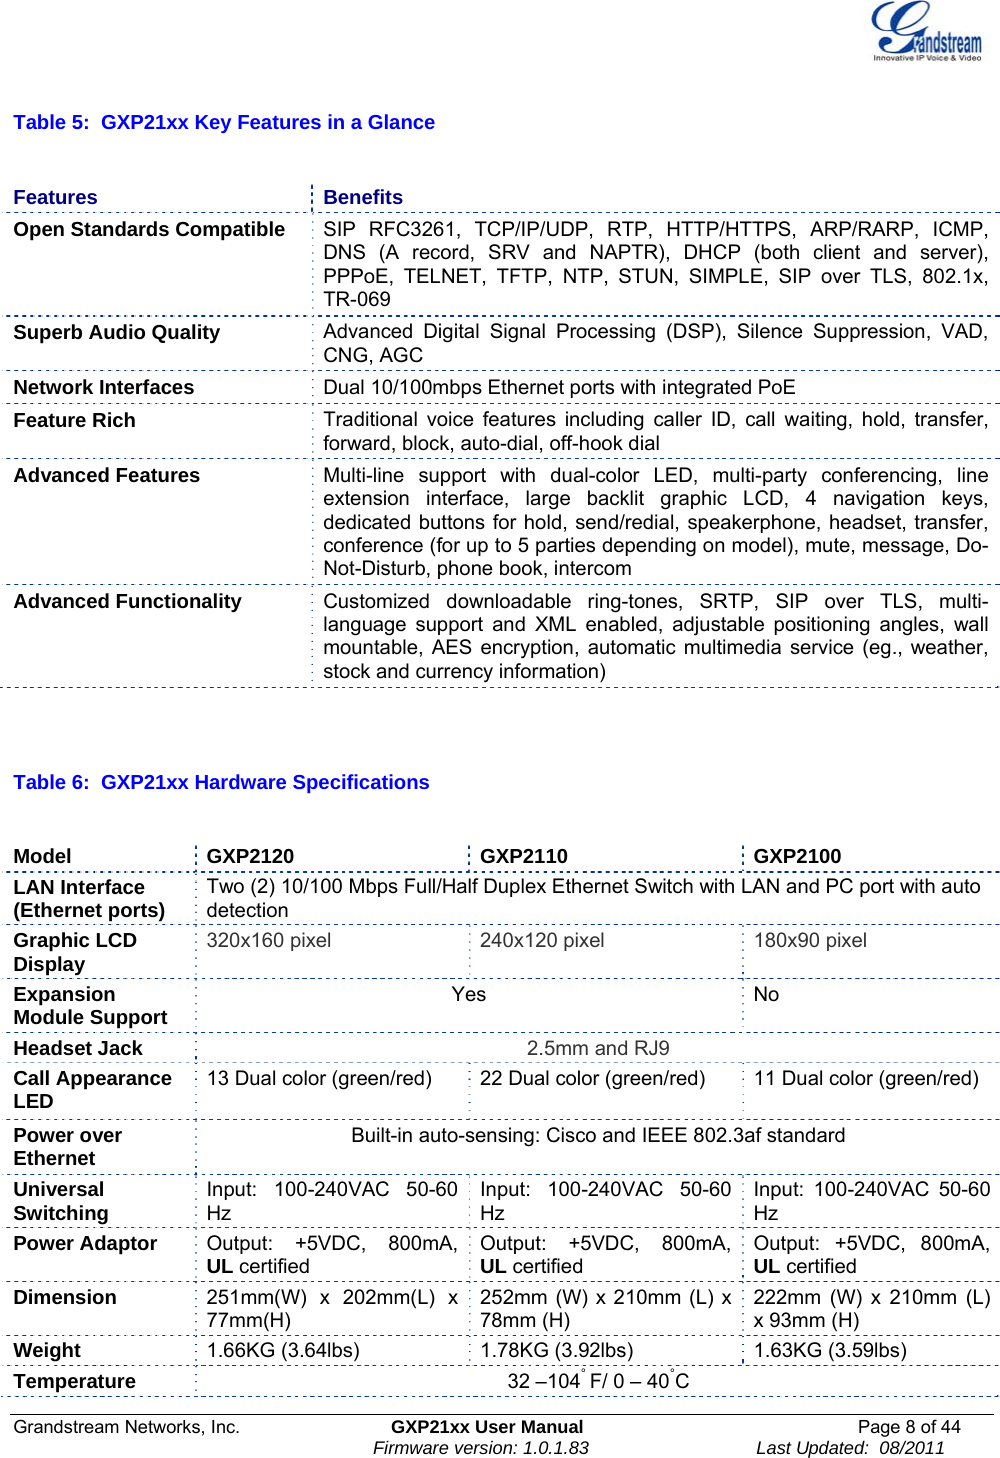  Grandstream Networks, Inc.  GXP21xx User Manual  Page 8 of 44                                                                Firmware version: 1.0.1.83                                 Last Updated:  08/2011  Table 5:  GXP21xx Key Features in a Glance  Features Benefits Open Standards Compatible  SIP RFC3261, TCP/IP/UDP, RTP, HTTP/HTTPS, ARP/RARP, ICMP, DNS (A record, SRV and NAPTR), DHCP (both client and server), PPPoE, TELNET, TFTP, NTP, STUN, SIMPLE, SIP over TLS, 802.1x, TR-069 Superb Audio Quality  Advanced Digital Signal Processing (DSP), Silence Suppression, VAD, CNG, AGC Network Interfaces  Dual 10/100mbps Ethernet ports with integrated PoE Feature Rich  Traditional voice features including caller ID, call waiting, hold, transfer, forward, block, auto-dial, off-hook dial Advanced Features  Multi-line support with dual-color LED, multi-party conferencing, line extension interface, large backlit graphic LCD, 4 navigation keys, dedicated buttons for hold, send/redial, speakerphone, headset, transfer, conference (for up to 5 parties depending on model), mute, message, Do-Not-Disturb, phone book, intercom Advanced Functionality  Customized downloadable ring-tones, SRTP, SIP over TLS, multi-language support and XML enabled, adjustable positioning angles, wall mountable, AES encryption, automatic multimedia service (eg., weather, stock and currency information)   Table 6:  GXP21xx Hardware Specifications  Model GXP2120  GXP2110 GXP2100 LAN Interface (Ethernet ports)  Two (2) 10/100 Mbps Full/Half Duplex Ethernet Switch with LAN and PC port with auto detection Graphic LCD Display  320x160 pixel  240x120 pixel  180x90 pixel Expansion Module Support  Yes No Headset Jack  2.5mm and RJ9 Call Appearance LED  13 Dual color (green/red)  22 Dual color (green/red)  11 Dual color (green/red) Power over Ethernet  Built-in auto-sensing: Cisco and IEEE 802.3af standard Universal Switching  Input: 100-240VAC 50-60 Hz Input: 100-240VAC 50-60 Hz Input: 100-240VAC 50-60 Hz Power Adaptor  Output: +5VDC, 800mA, UL certified  Output: +5VDC, 800mA, UL certified Output: +5VDC, 800mA, UL certified Dimension  251mm(W) x 202mm(L) x 77mm(H) 252mm (W) x 210mm (L) x 78mm (H) 222mm (W) x 210mm (L) x 93mm (H) Weight  1.66KG (3.64lbs)  1.78KG (3.92lbs)  1.63KG (3.59lbs) Temperature  32 –104° F/ 0 – 40°C 